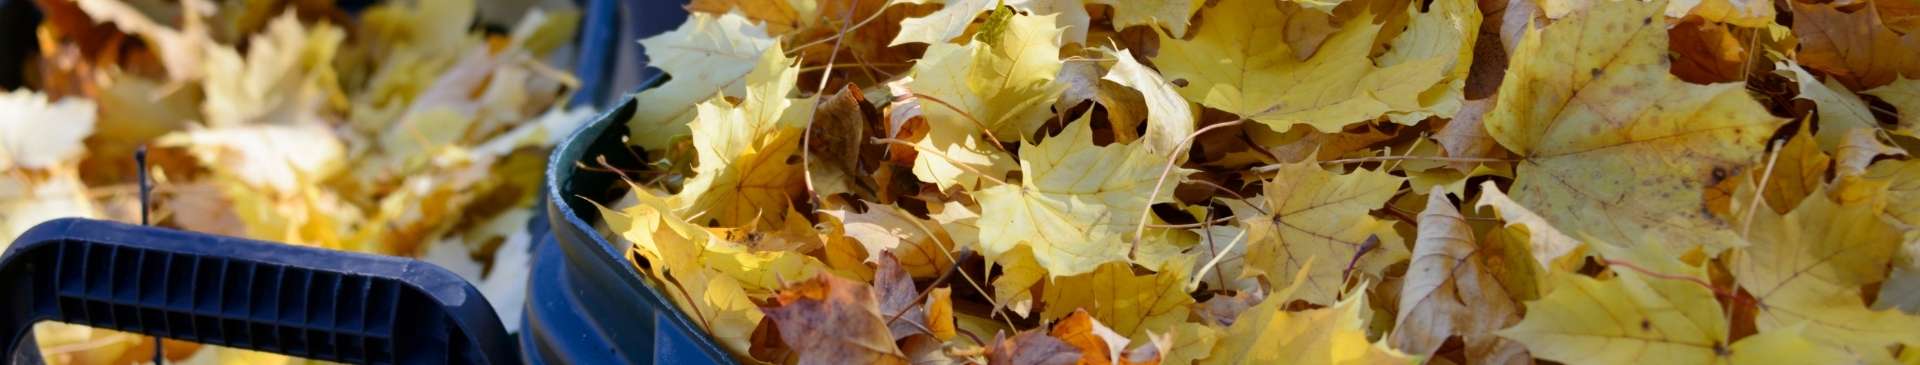 Autumn Leaves: A Natural Harvest That Shouldn't Go to Waste